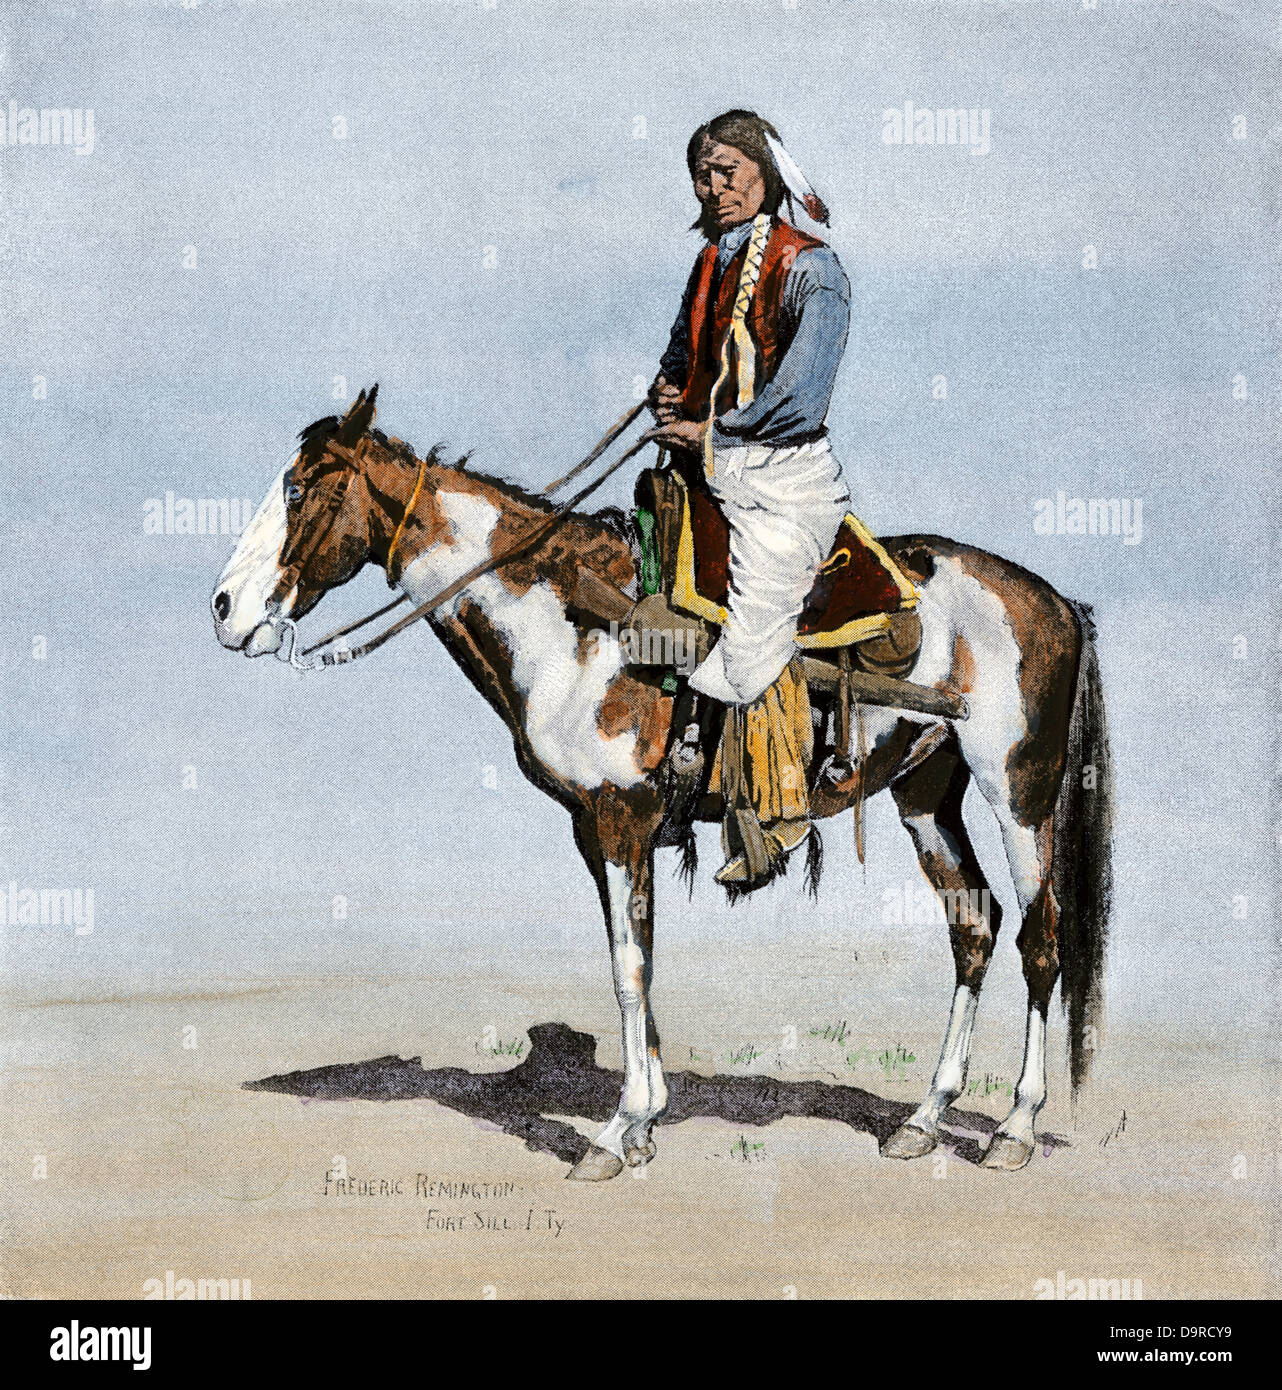 Comanche brave on horseback, 1800s. Hand-colored woodcut of a Frederic Remington illustration Stock Photo